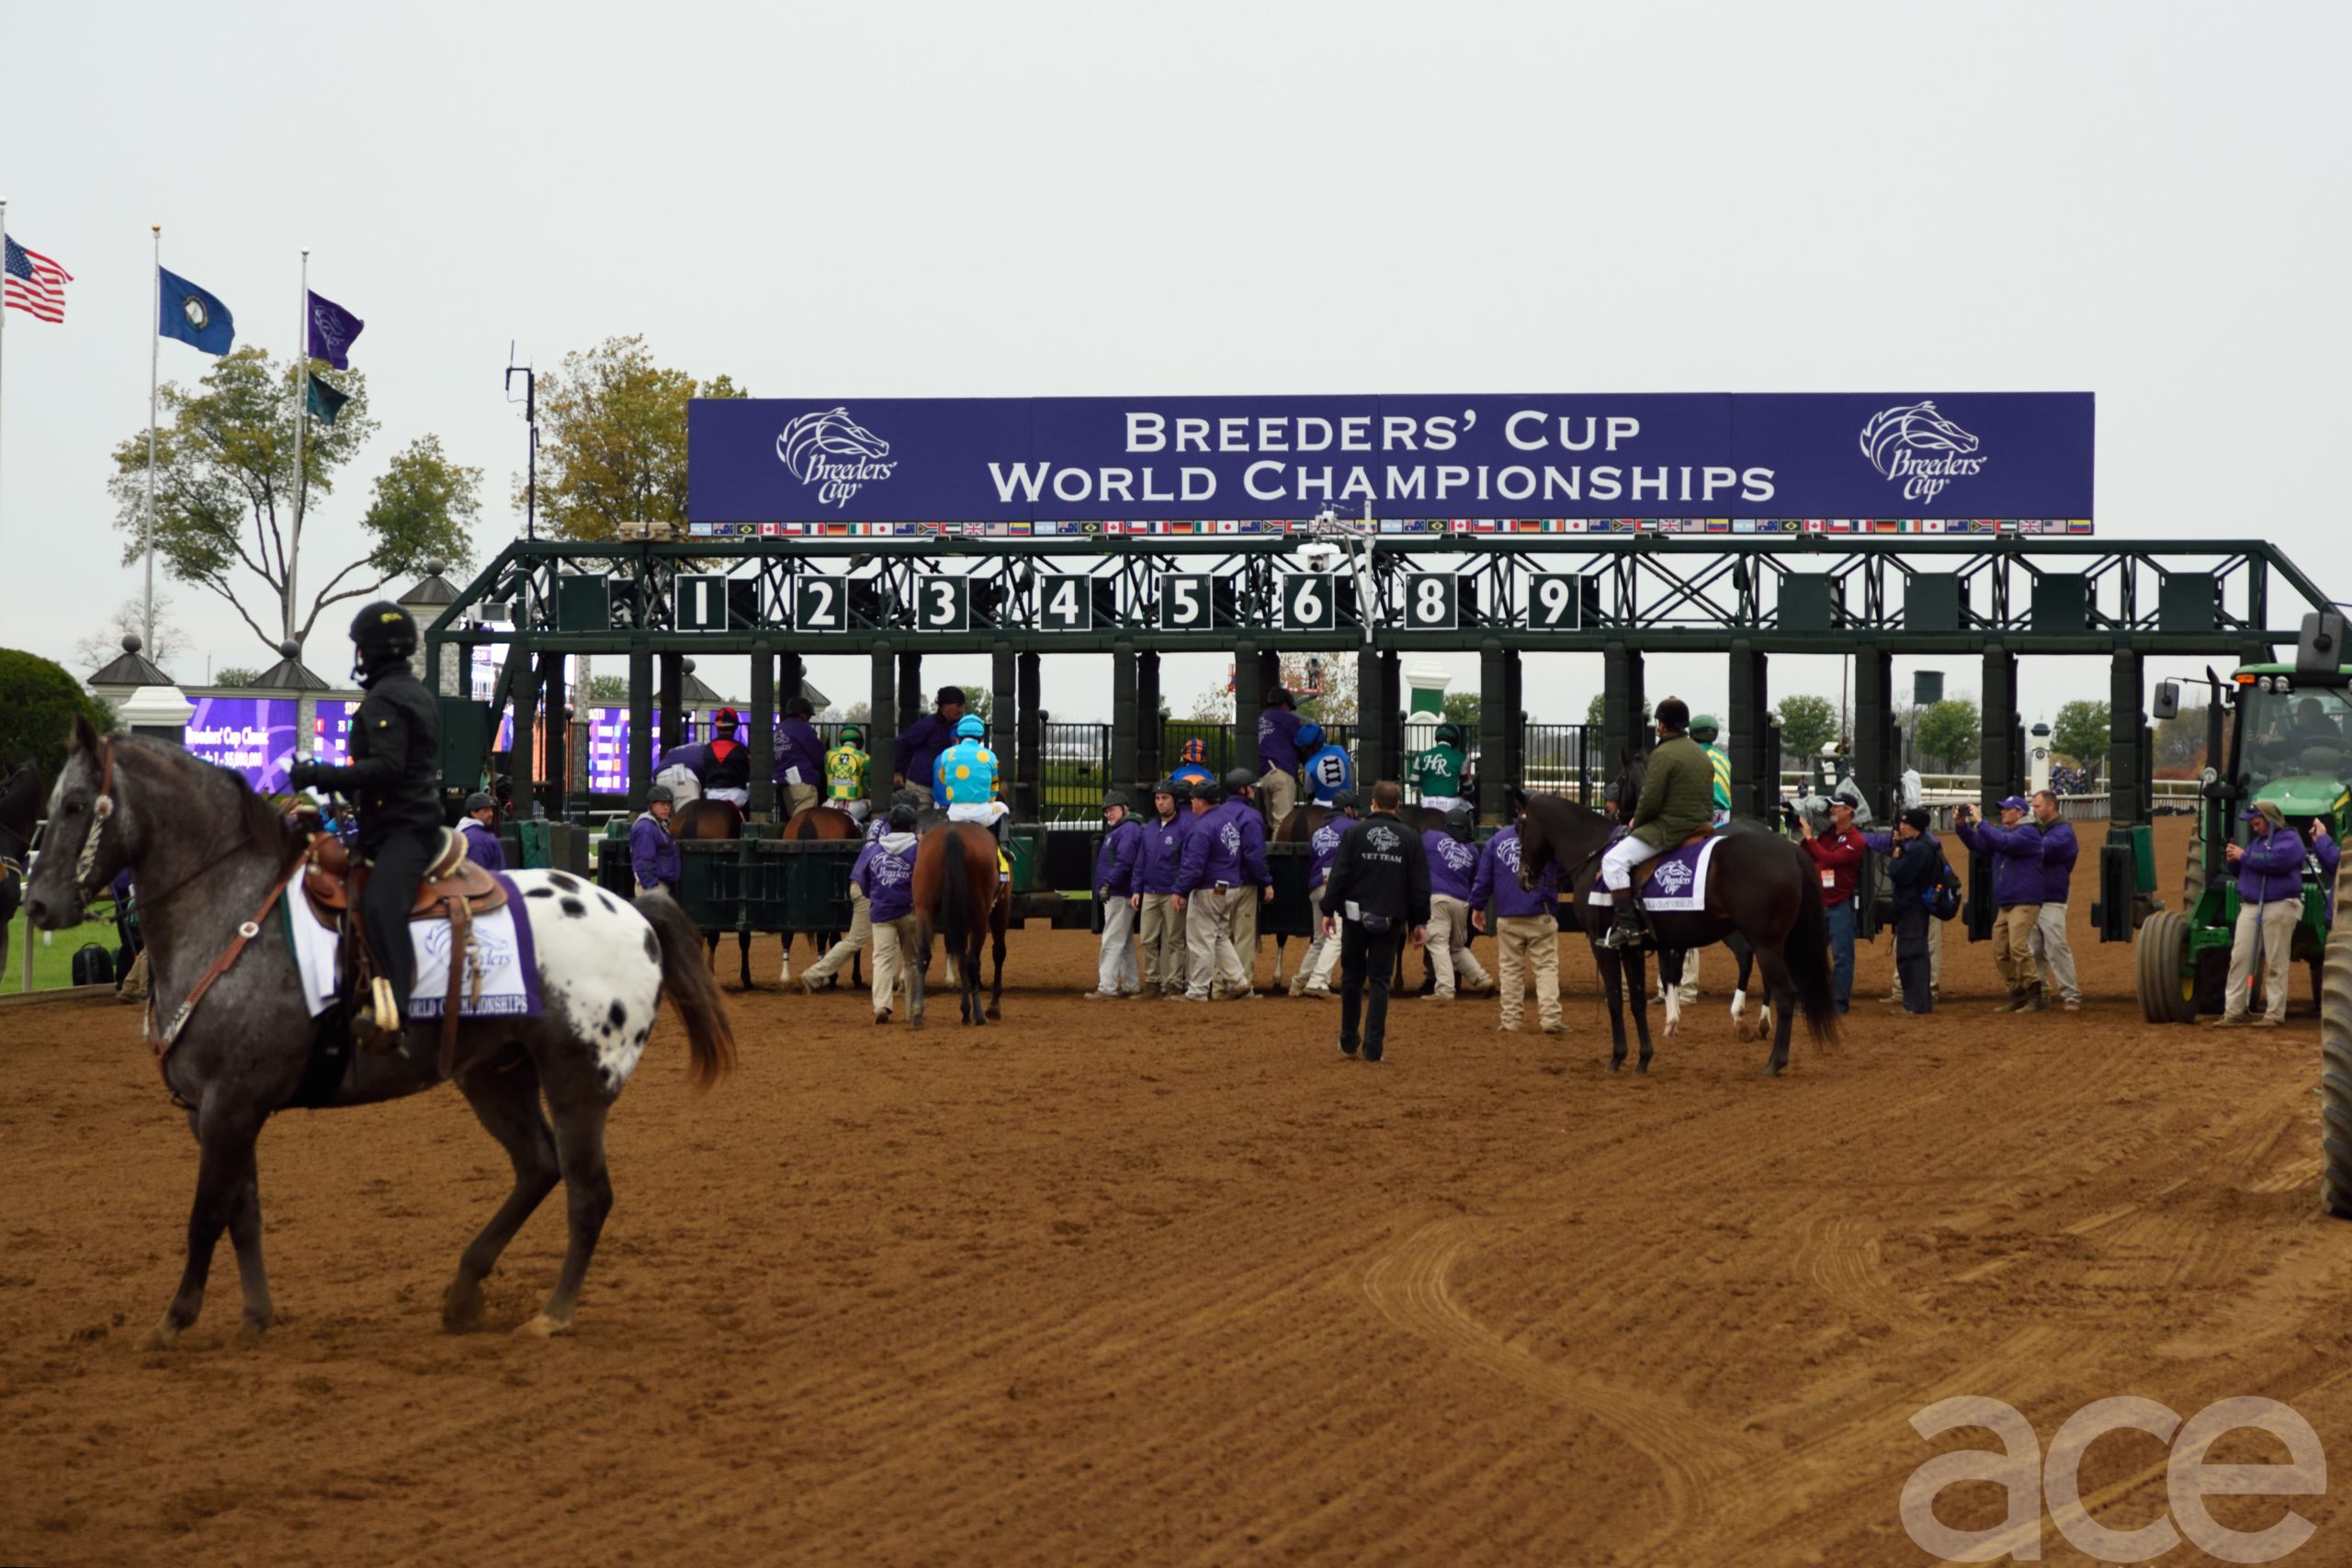 Keeneland Schedule 2022 The Breeders' Cup Comes To Keeneland In 2020 And 2022 | Ace Weekly